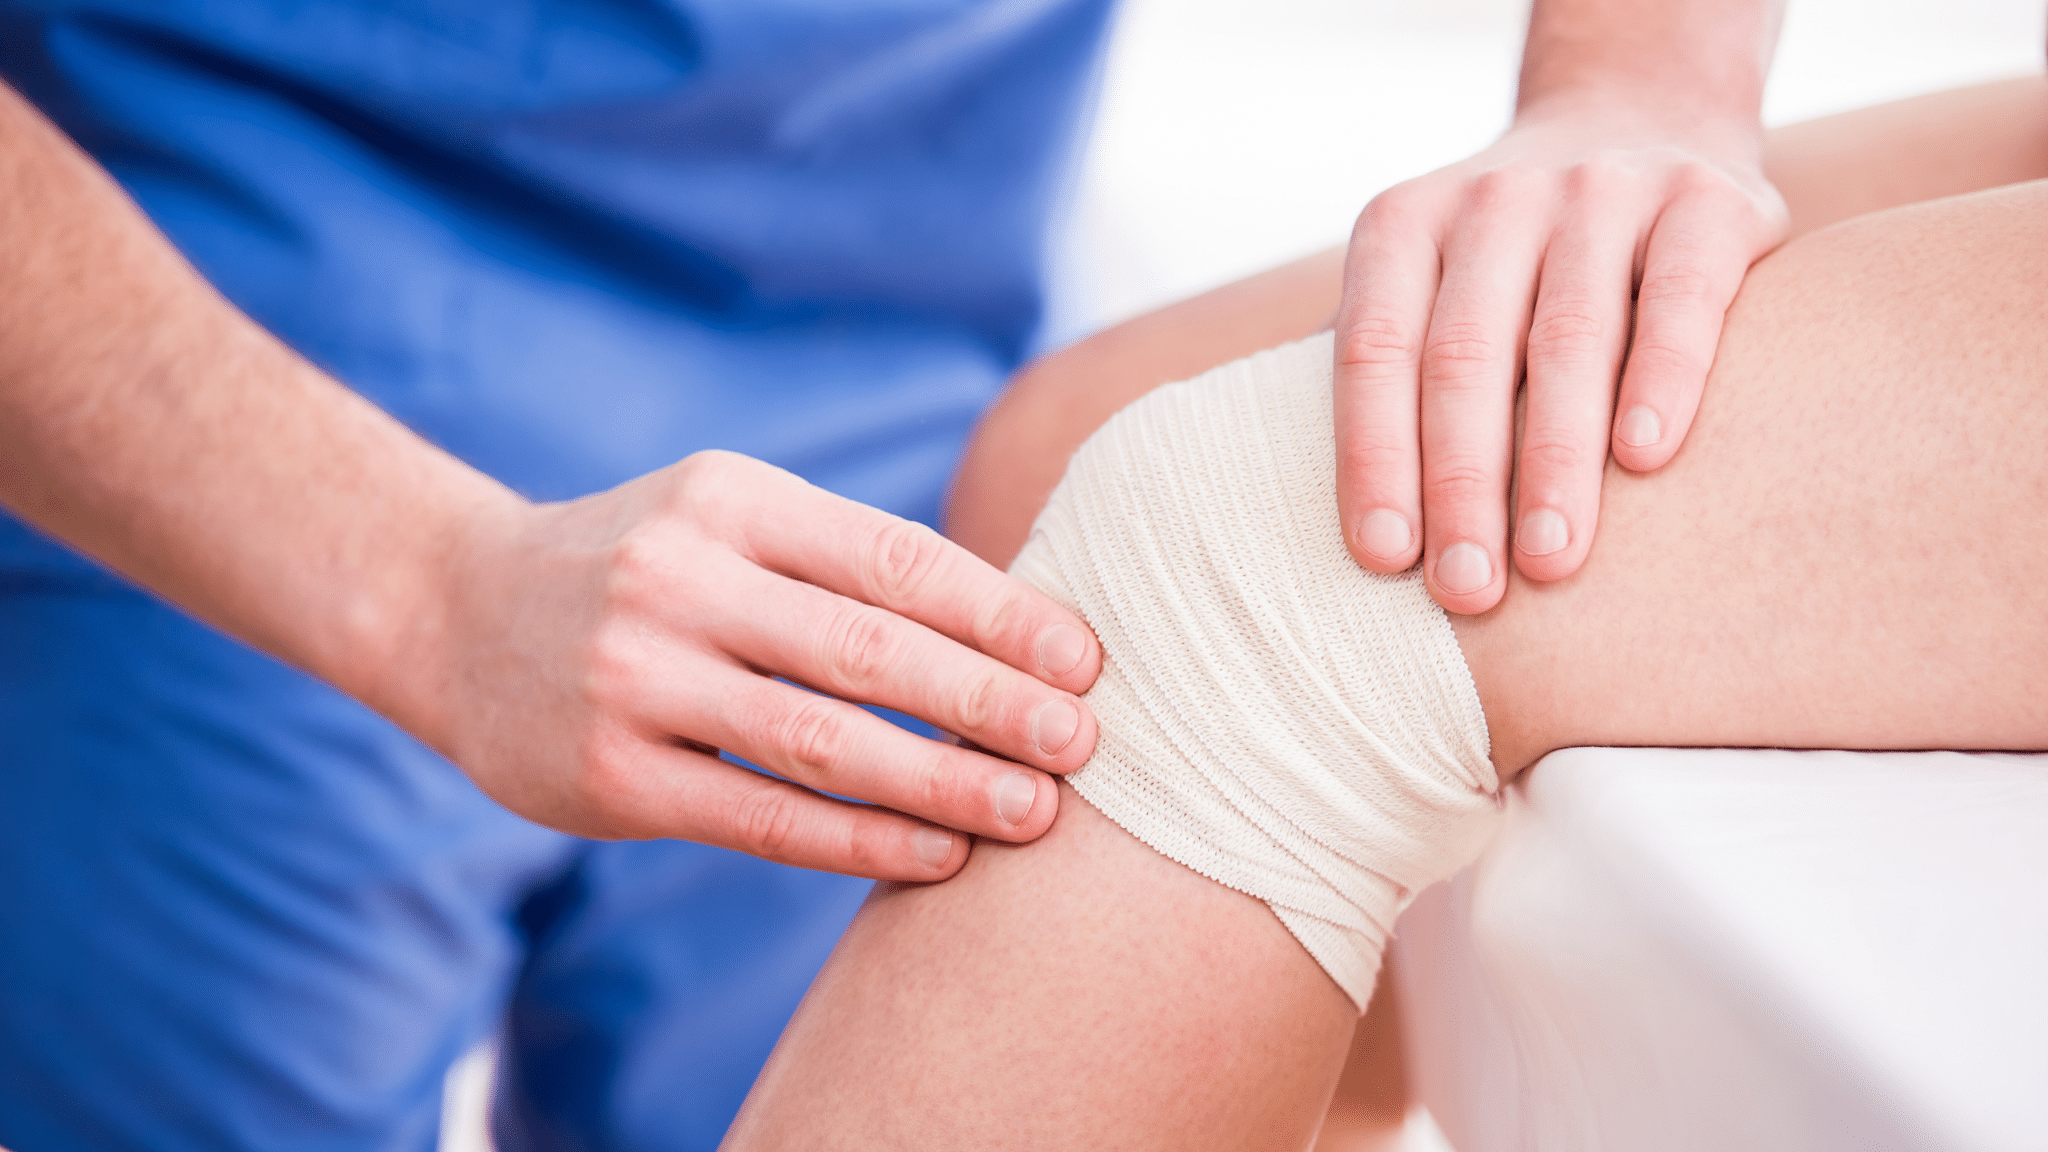 Provider examining a wrapped knee